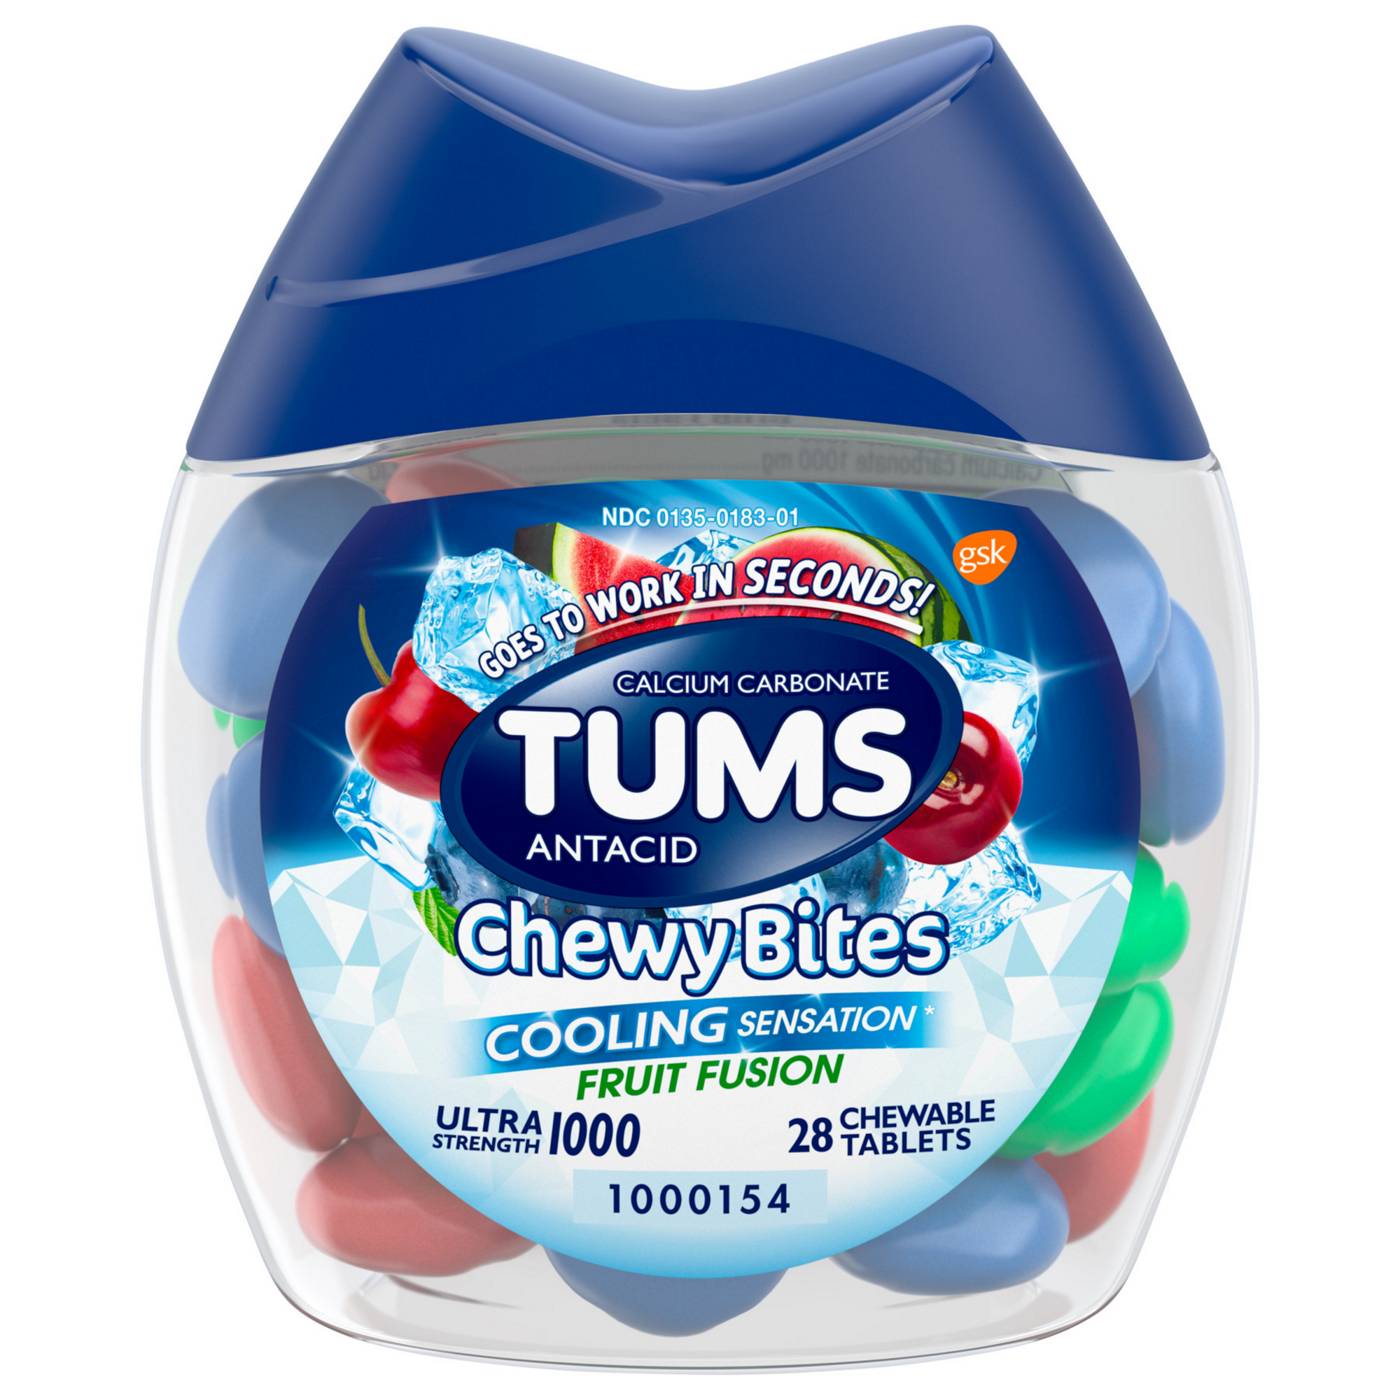 Tums Antacid Chewy Bites Cooling Sensation Tablets -  Fruit Fusion; image 1 of 8